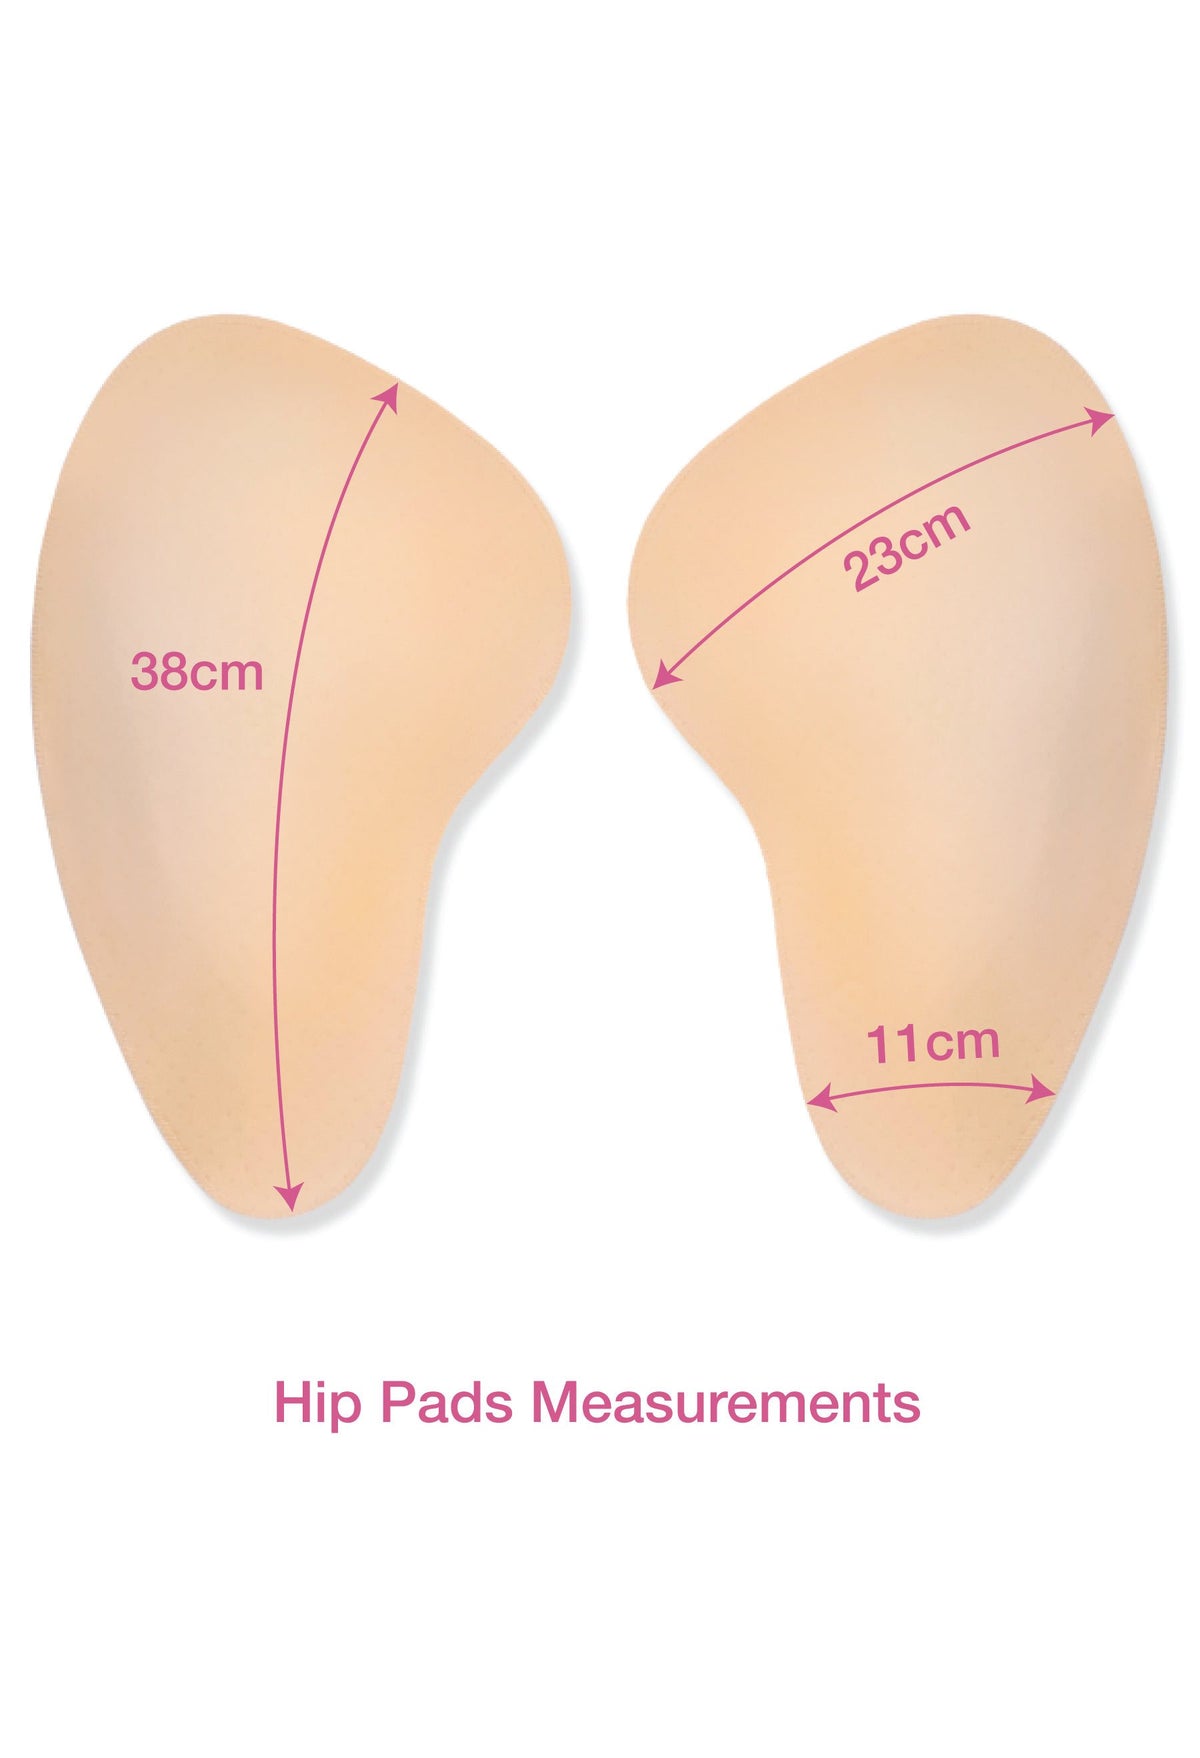 Extra Large Hip Pads - Non Stick